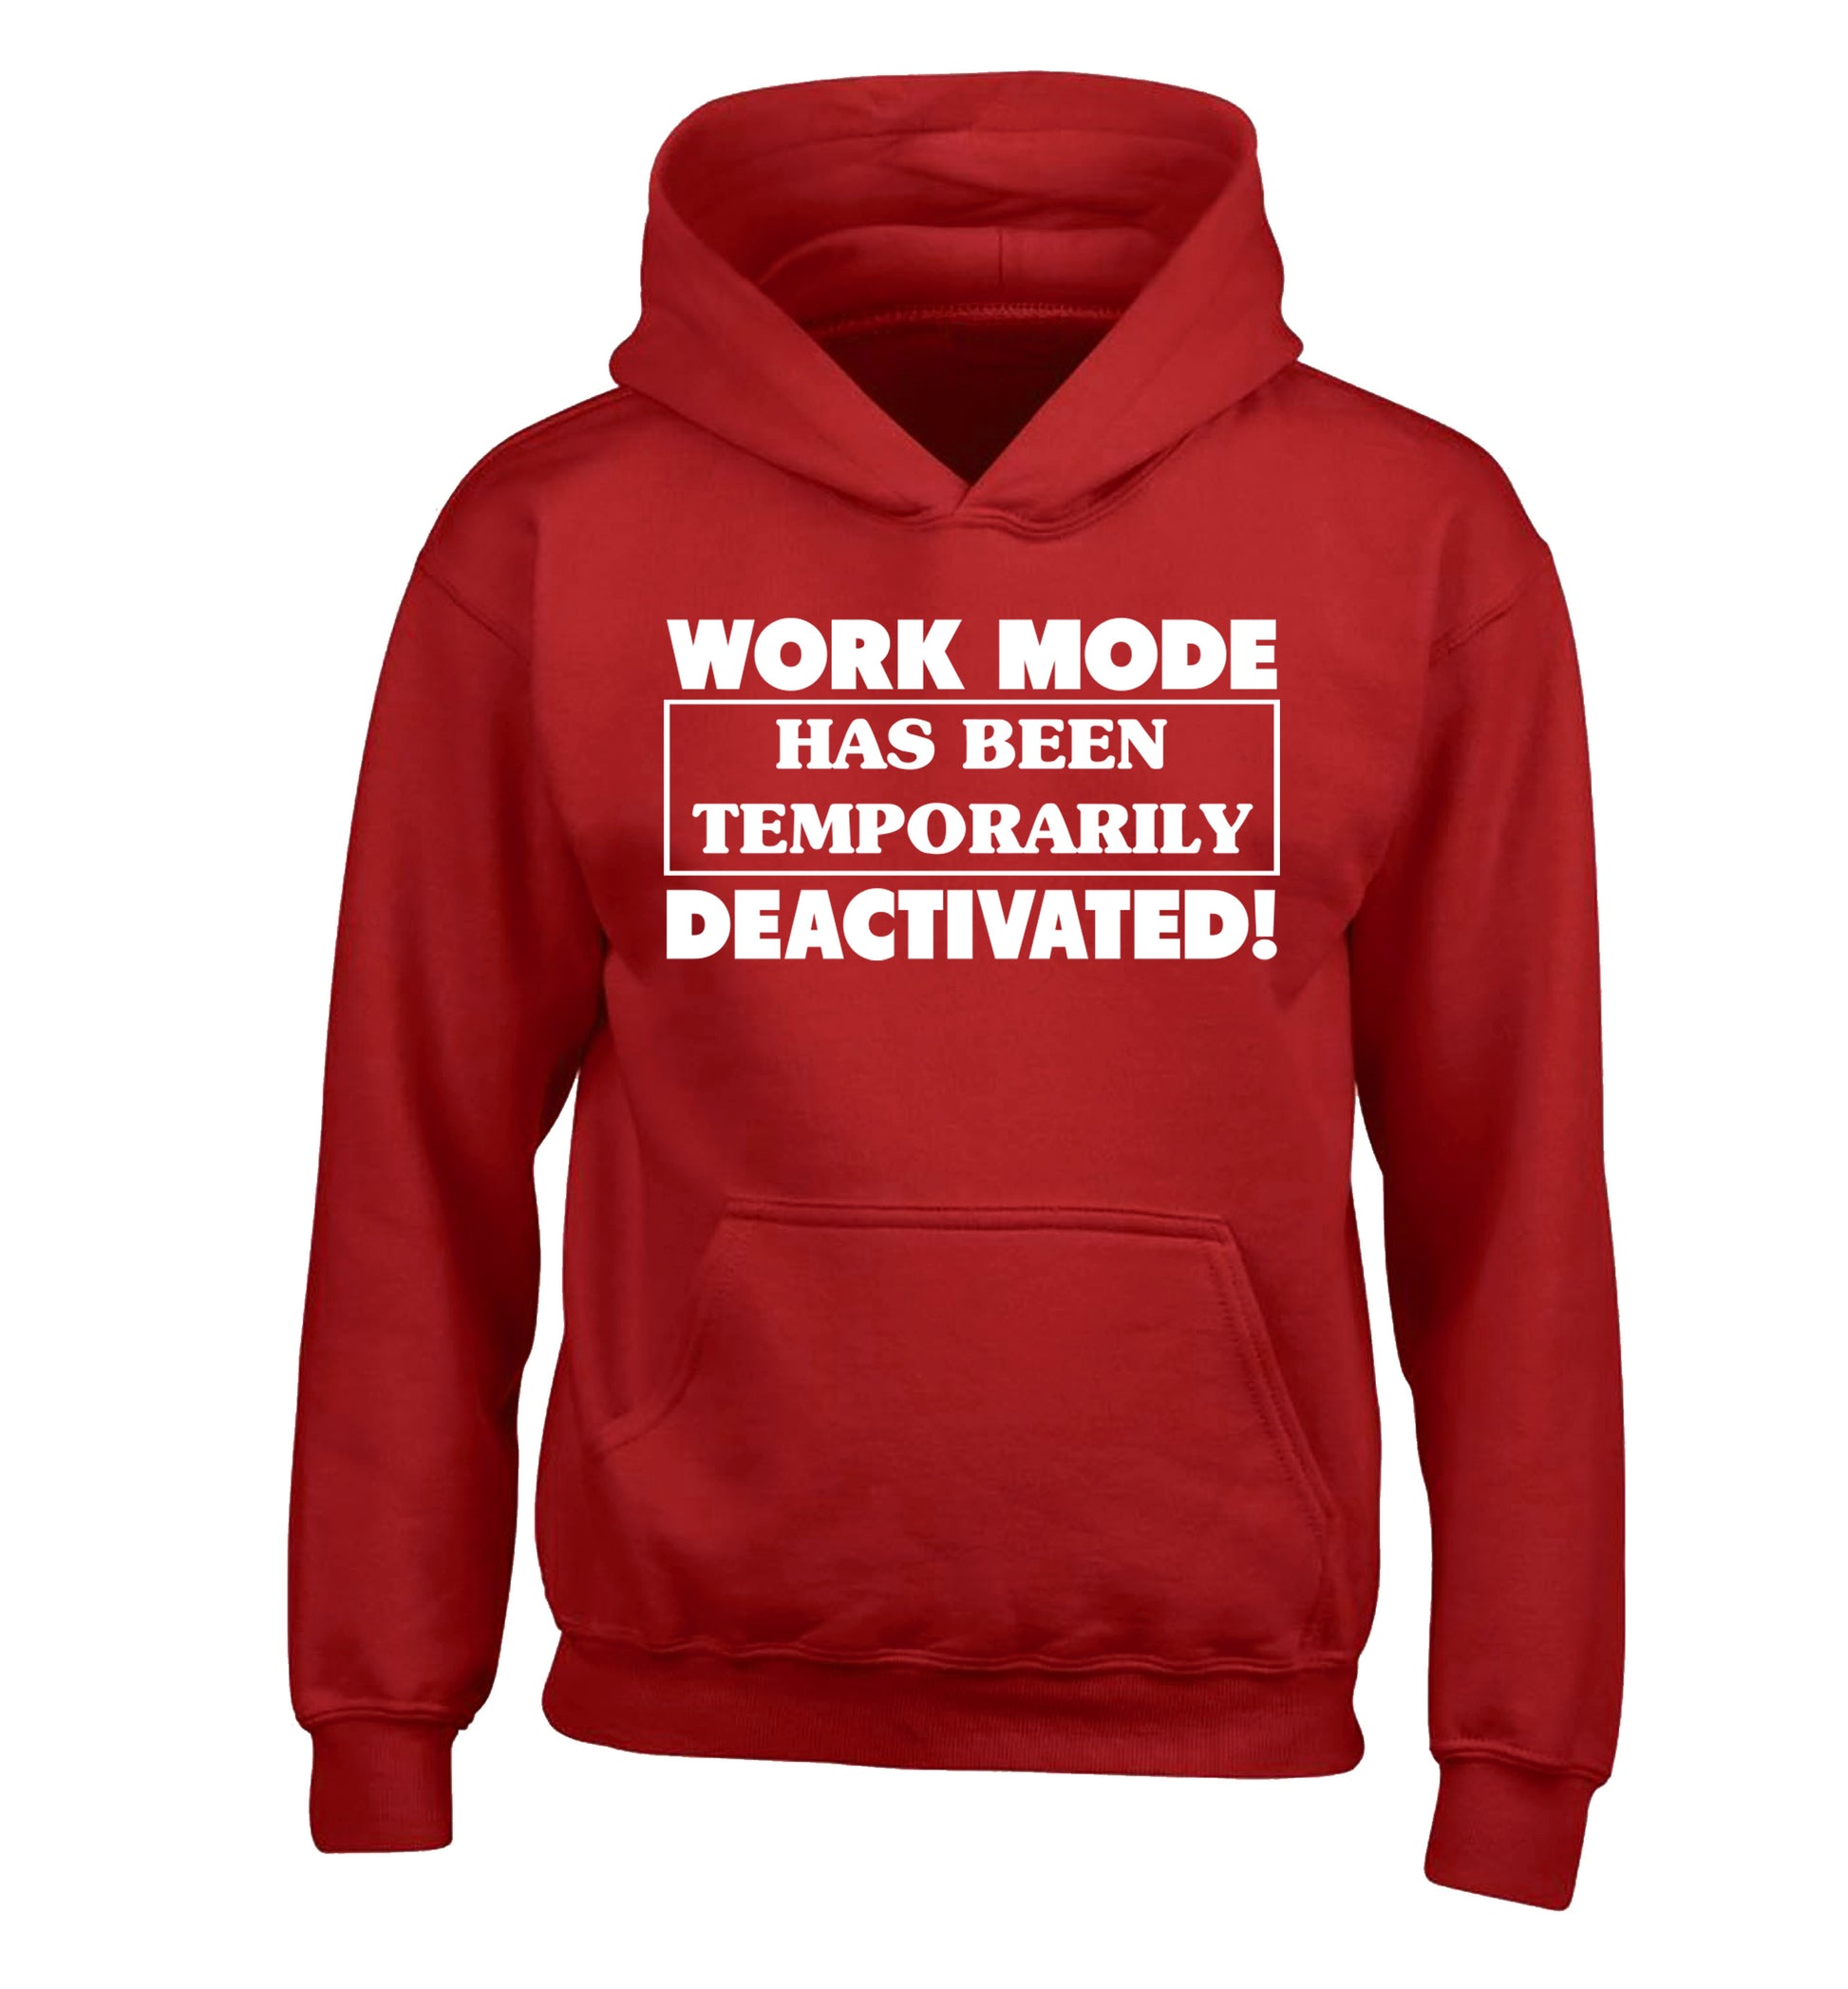 Work mode has now been temporarily deactivated children's red hoodie 12-13 Years